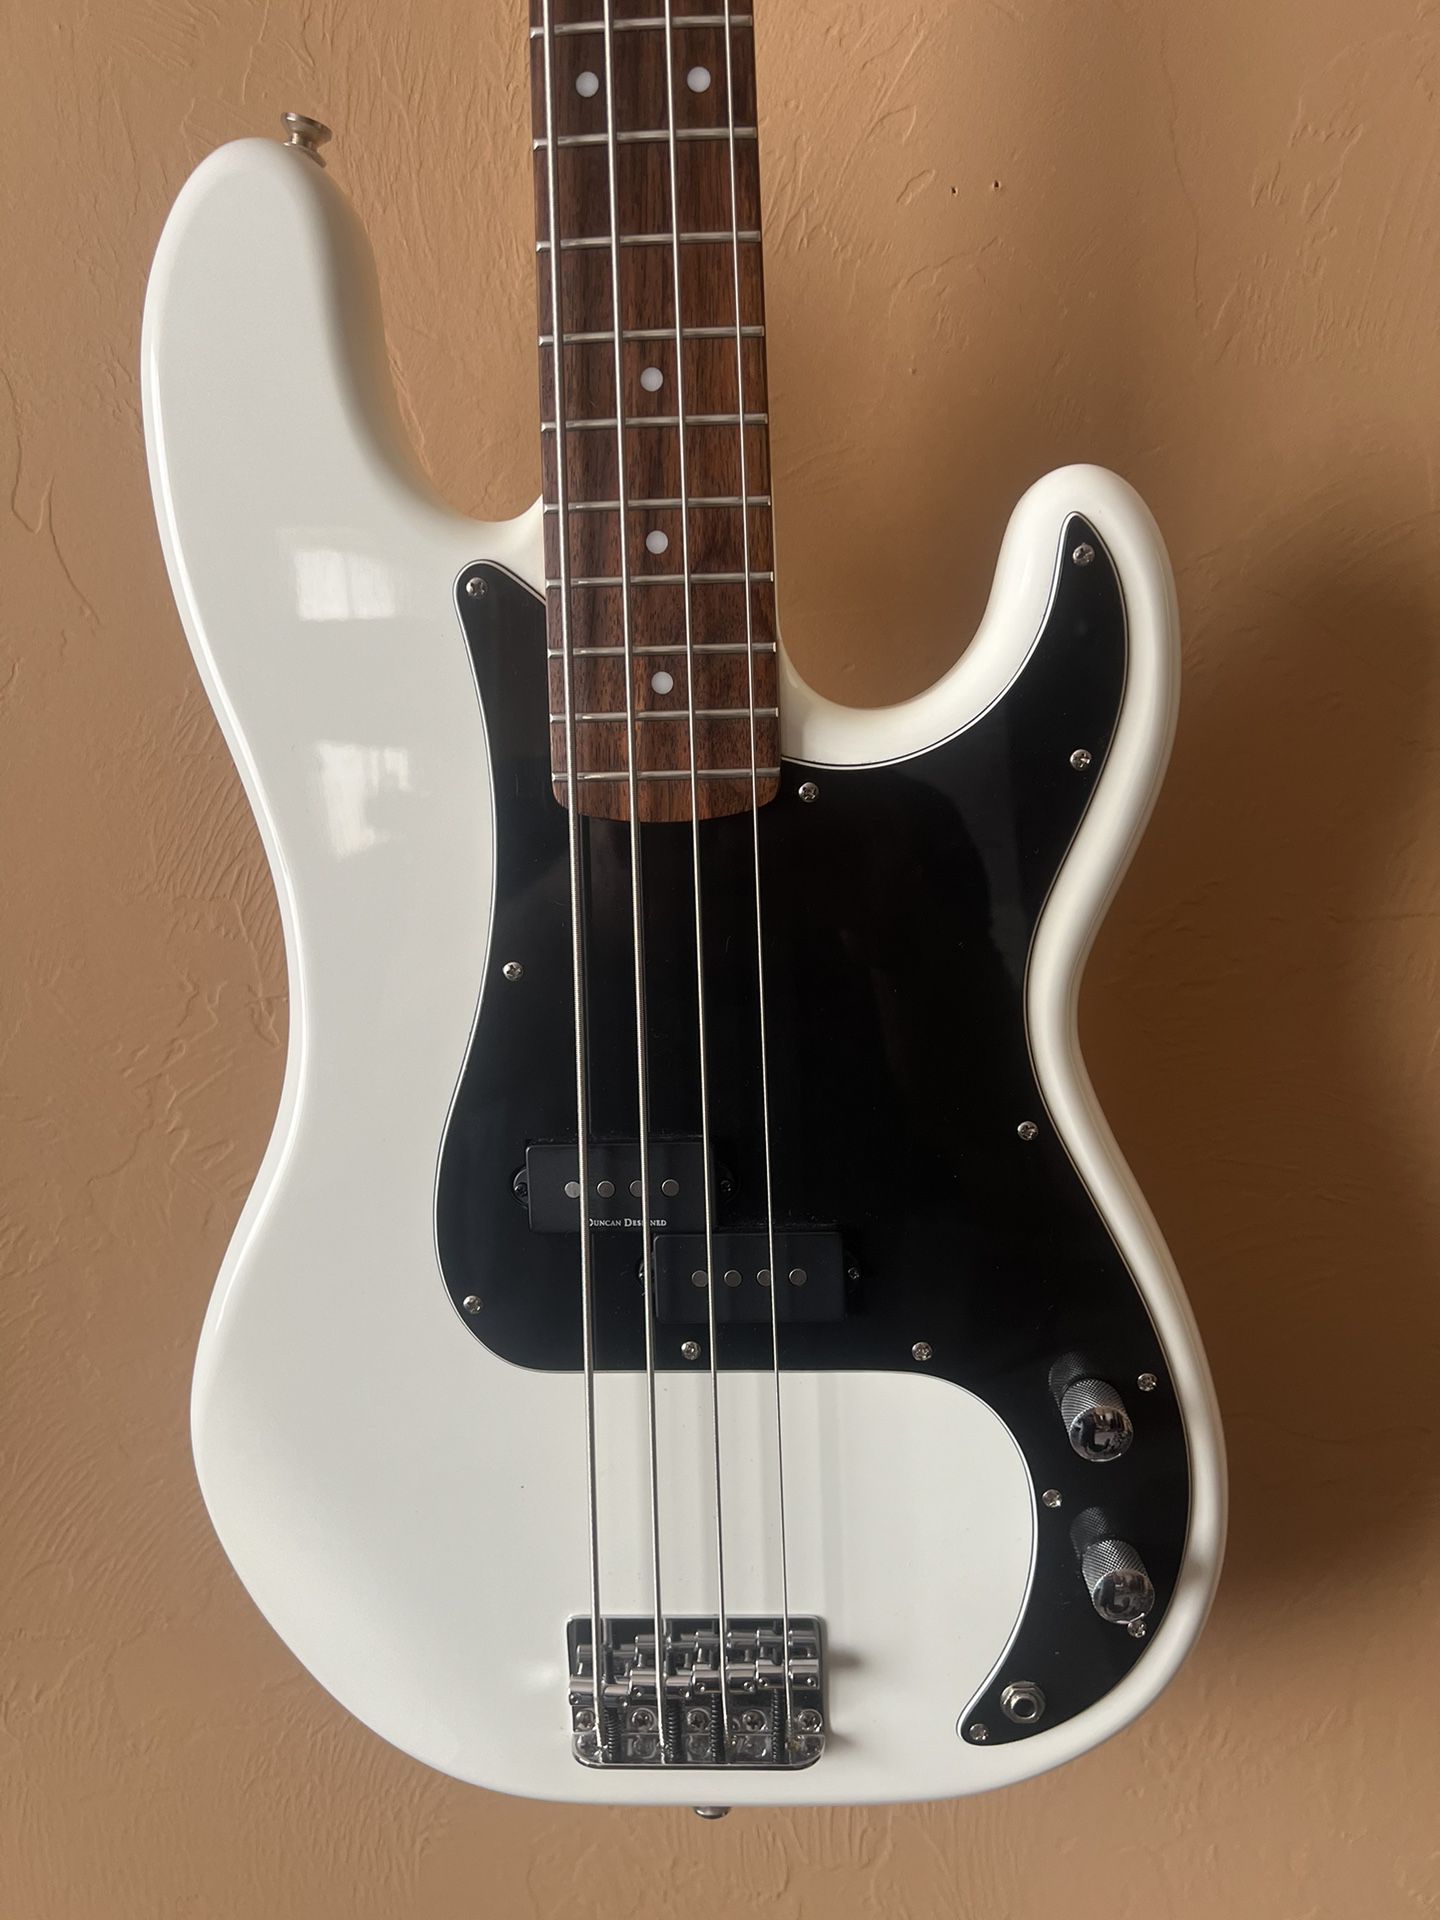 Fender Squire p bass